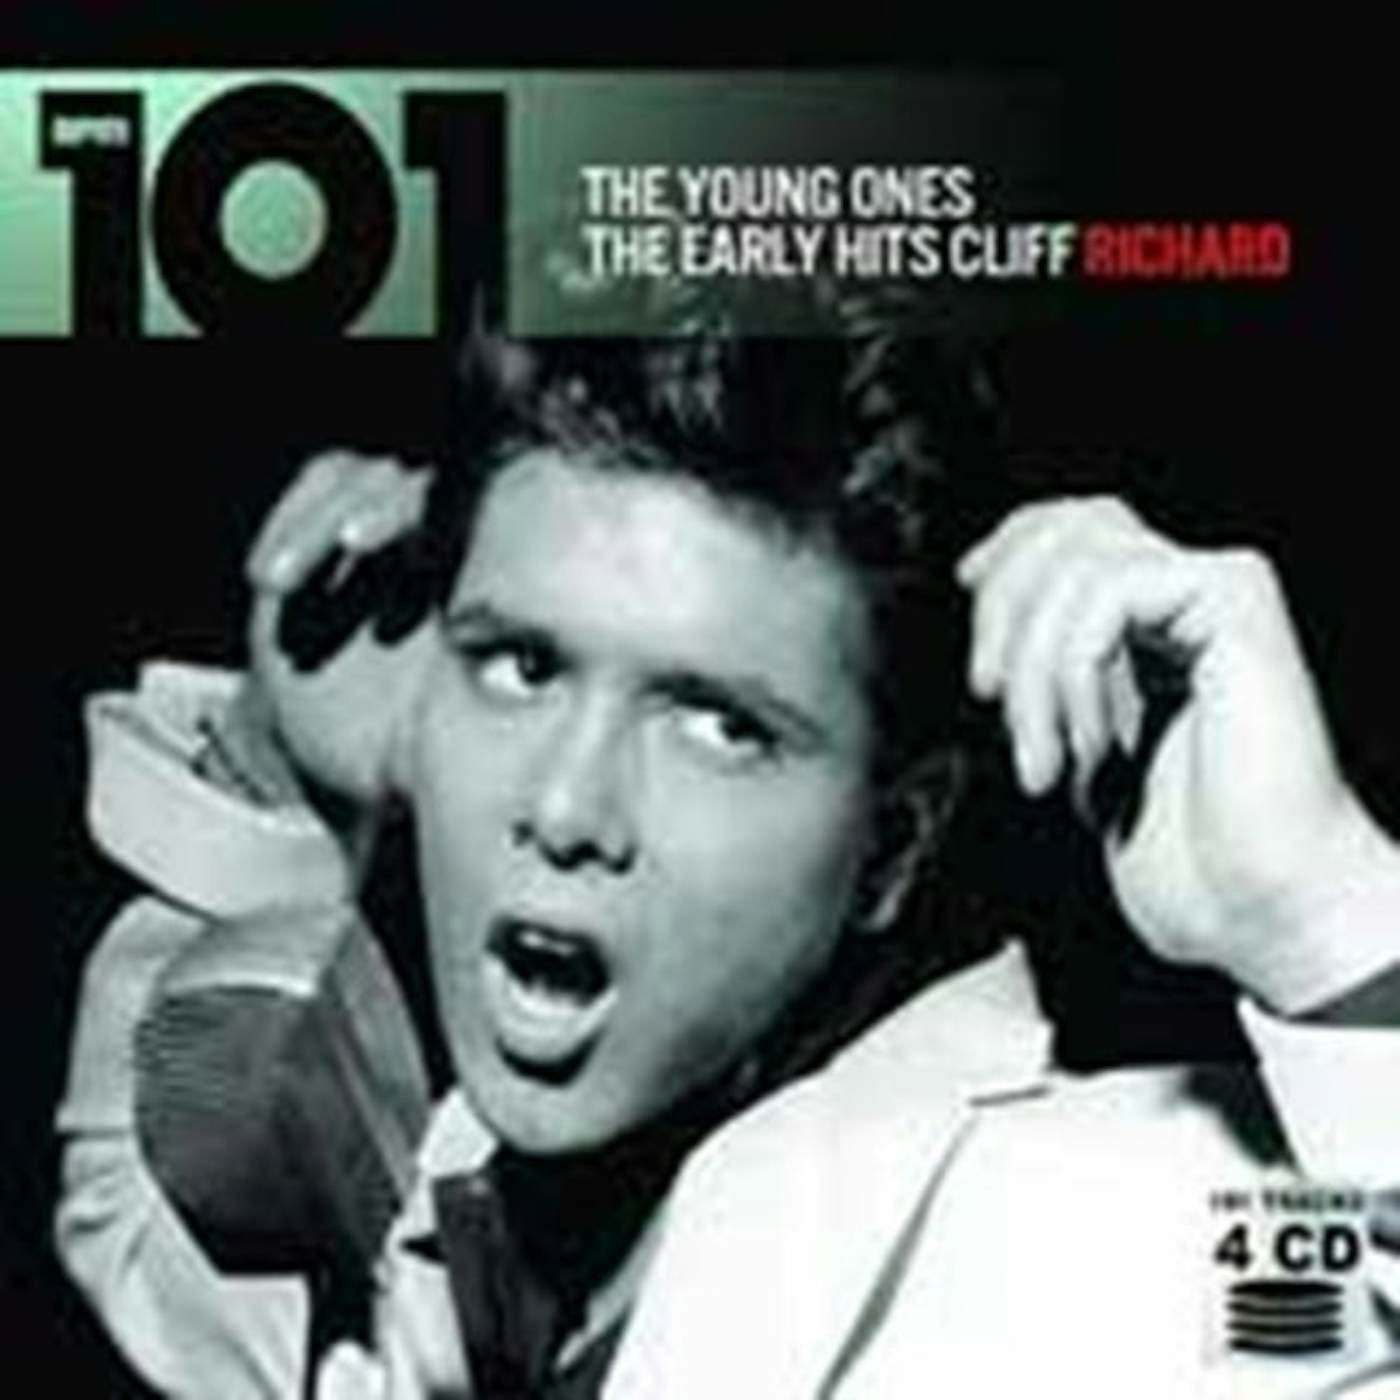 Cliff Richard CD - 101 - The Young Ones: The Early Hits Of Cliff Richard